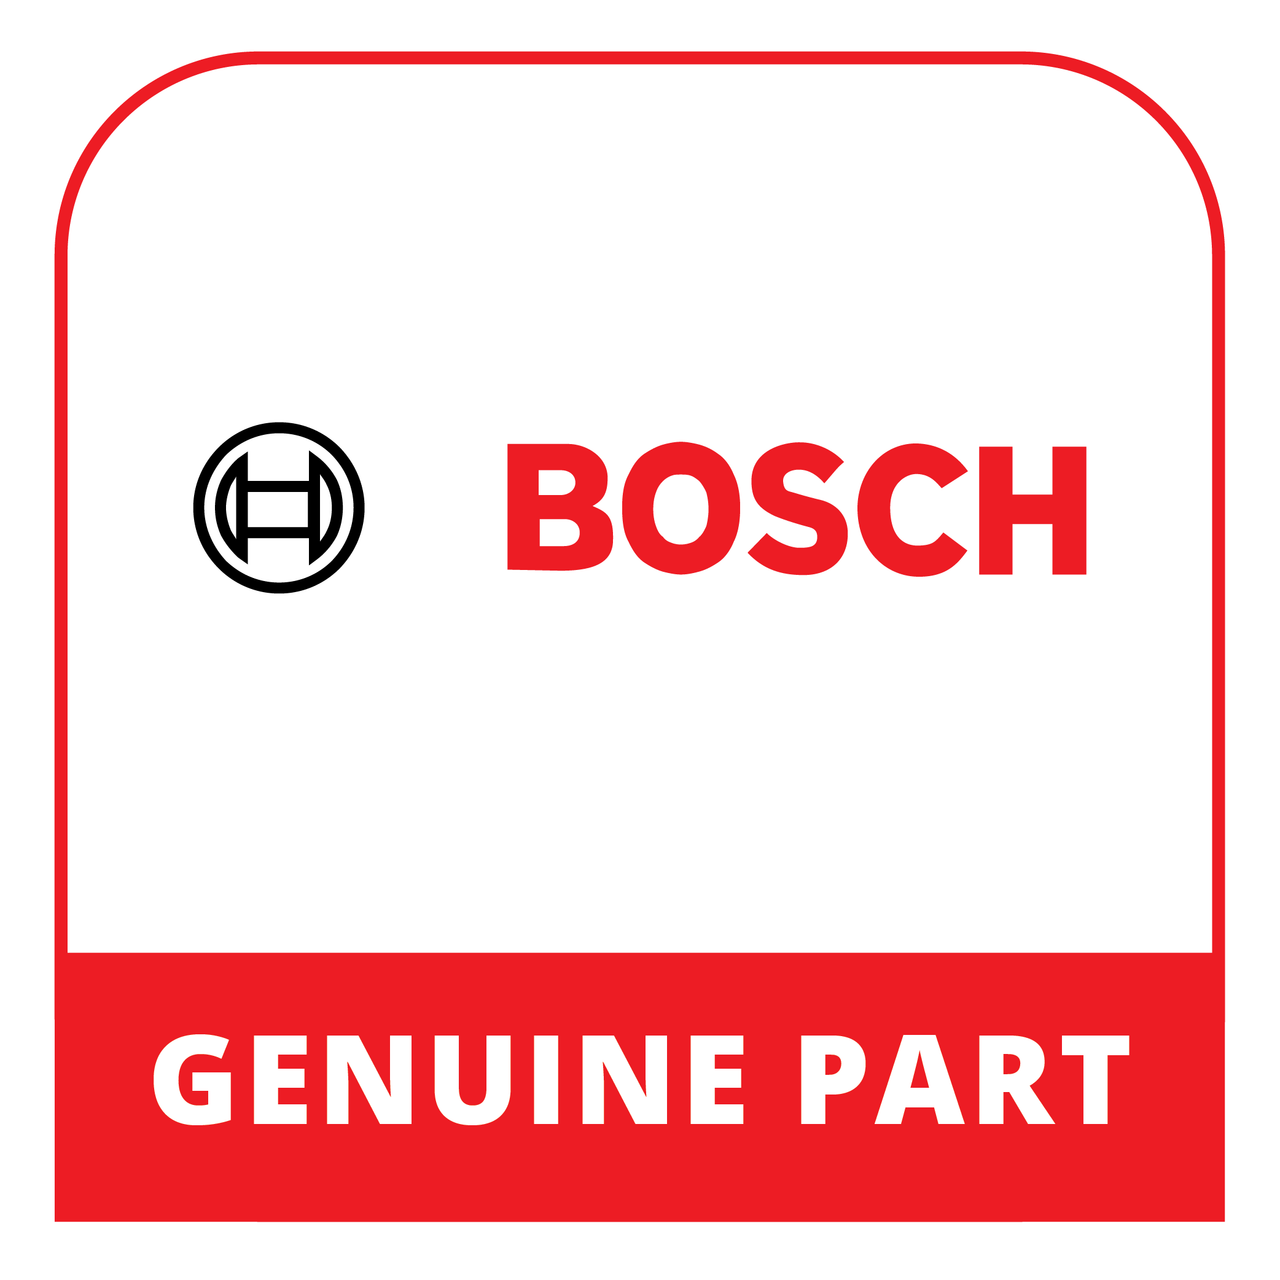 Bosch (Thermador) 12028829 - Cable Harness - Genuine Bosch (Thermador) Part